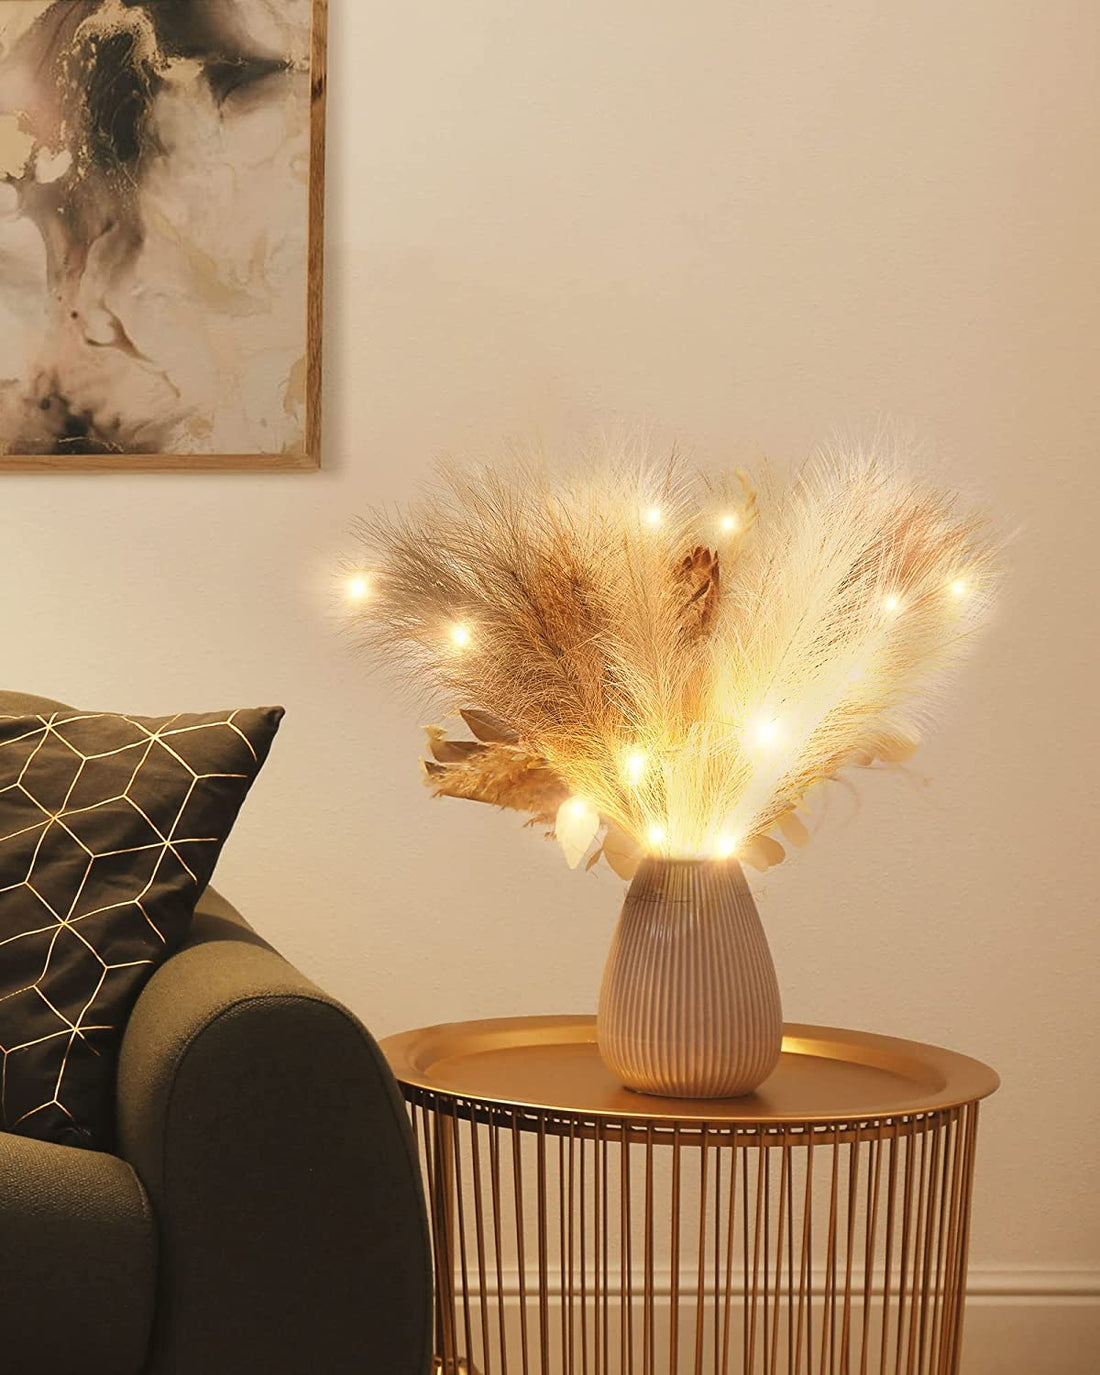 15 Ways to Decorate With Pampas Grass